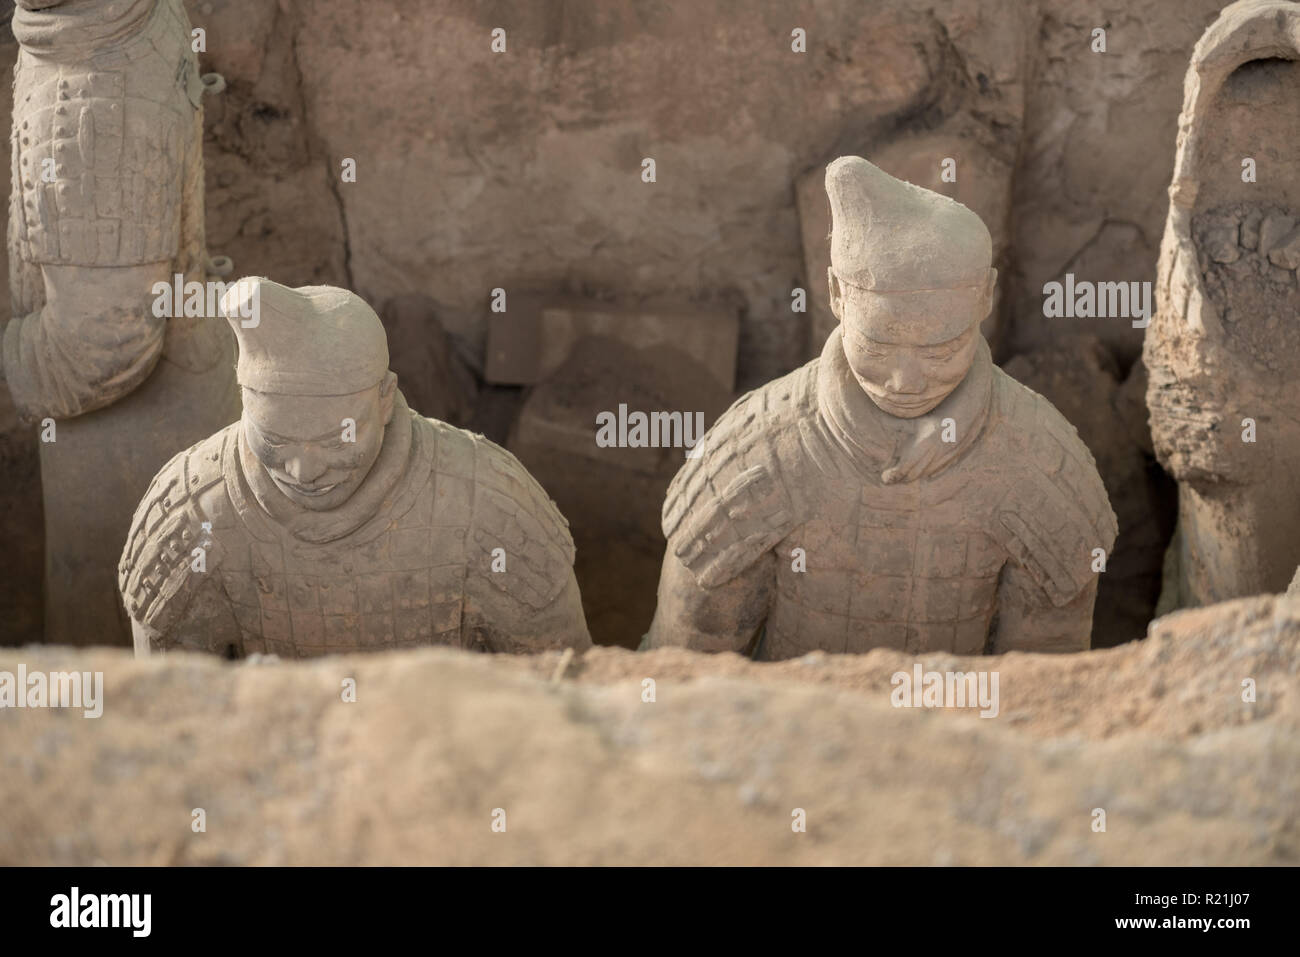 Terracotta Army warriors buried in Emperor tomb outside Xian China Stock Photo